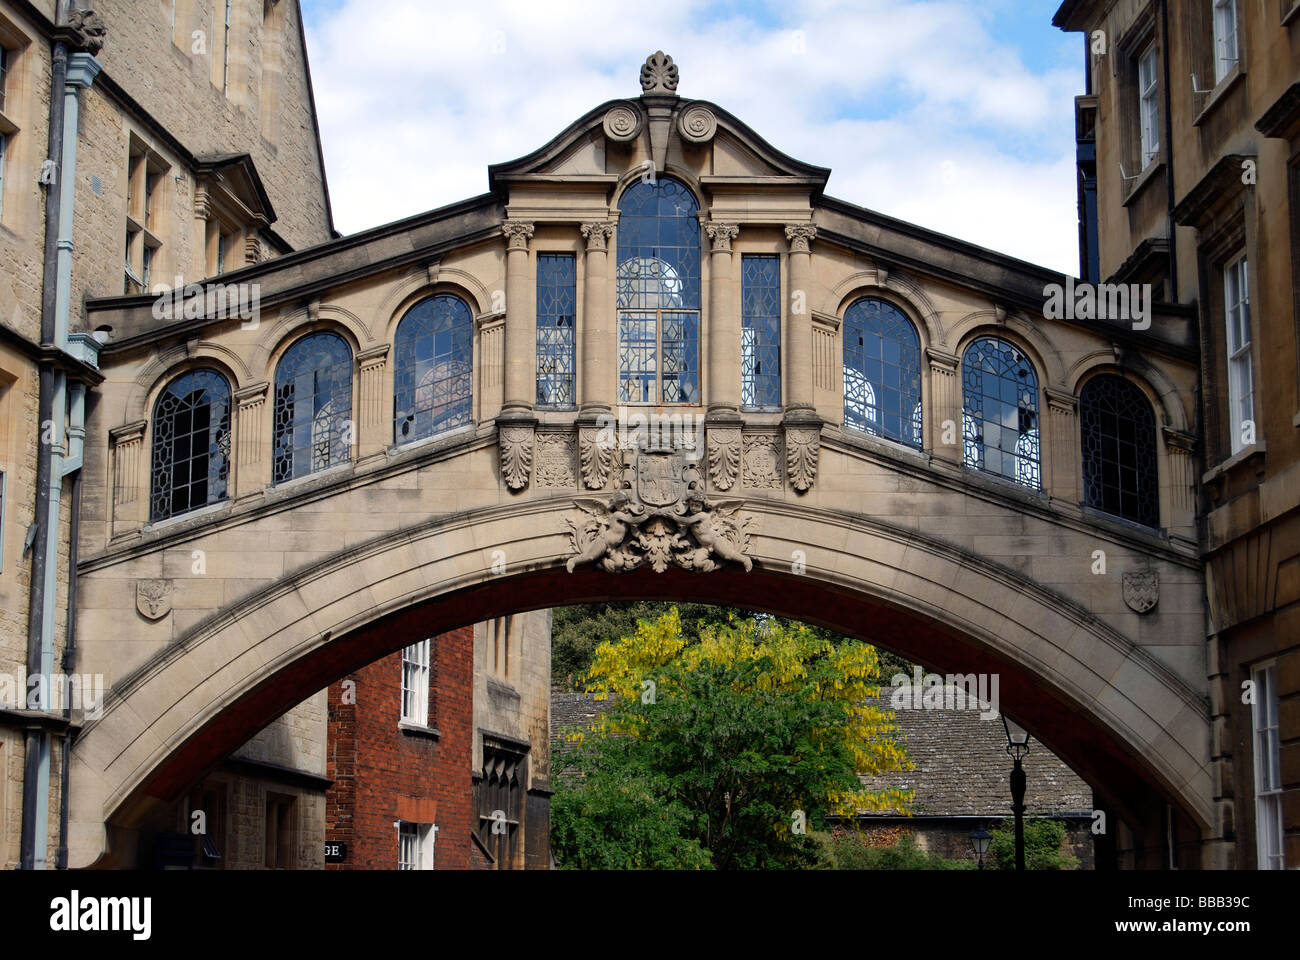 The Hertford Bridge, Oxford, also known as The Bridge of Sighs joins the old and new Quadrangles of Hertford College in Oxford Stock Photo